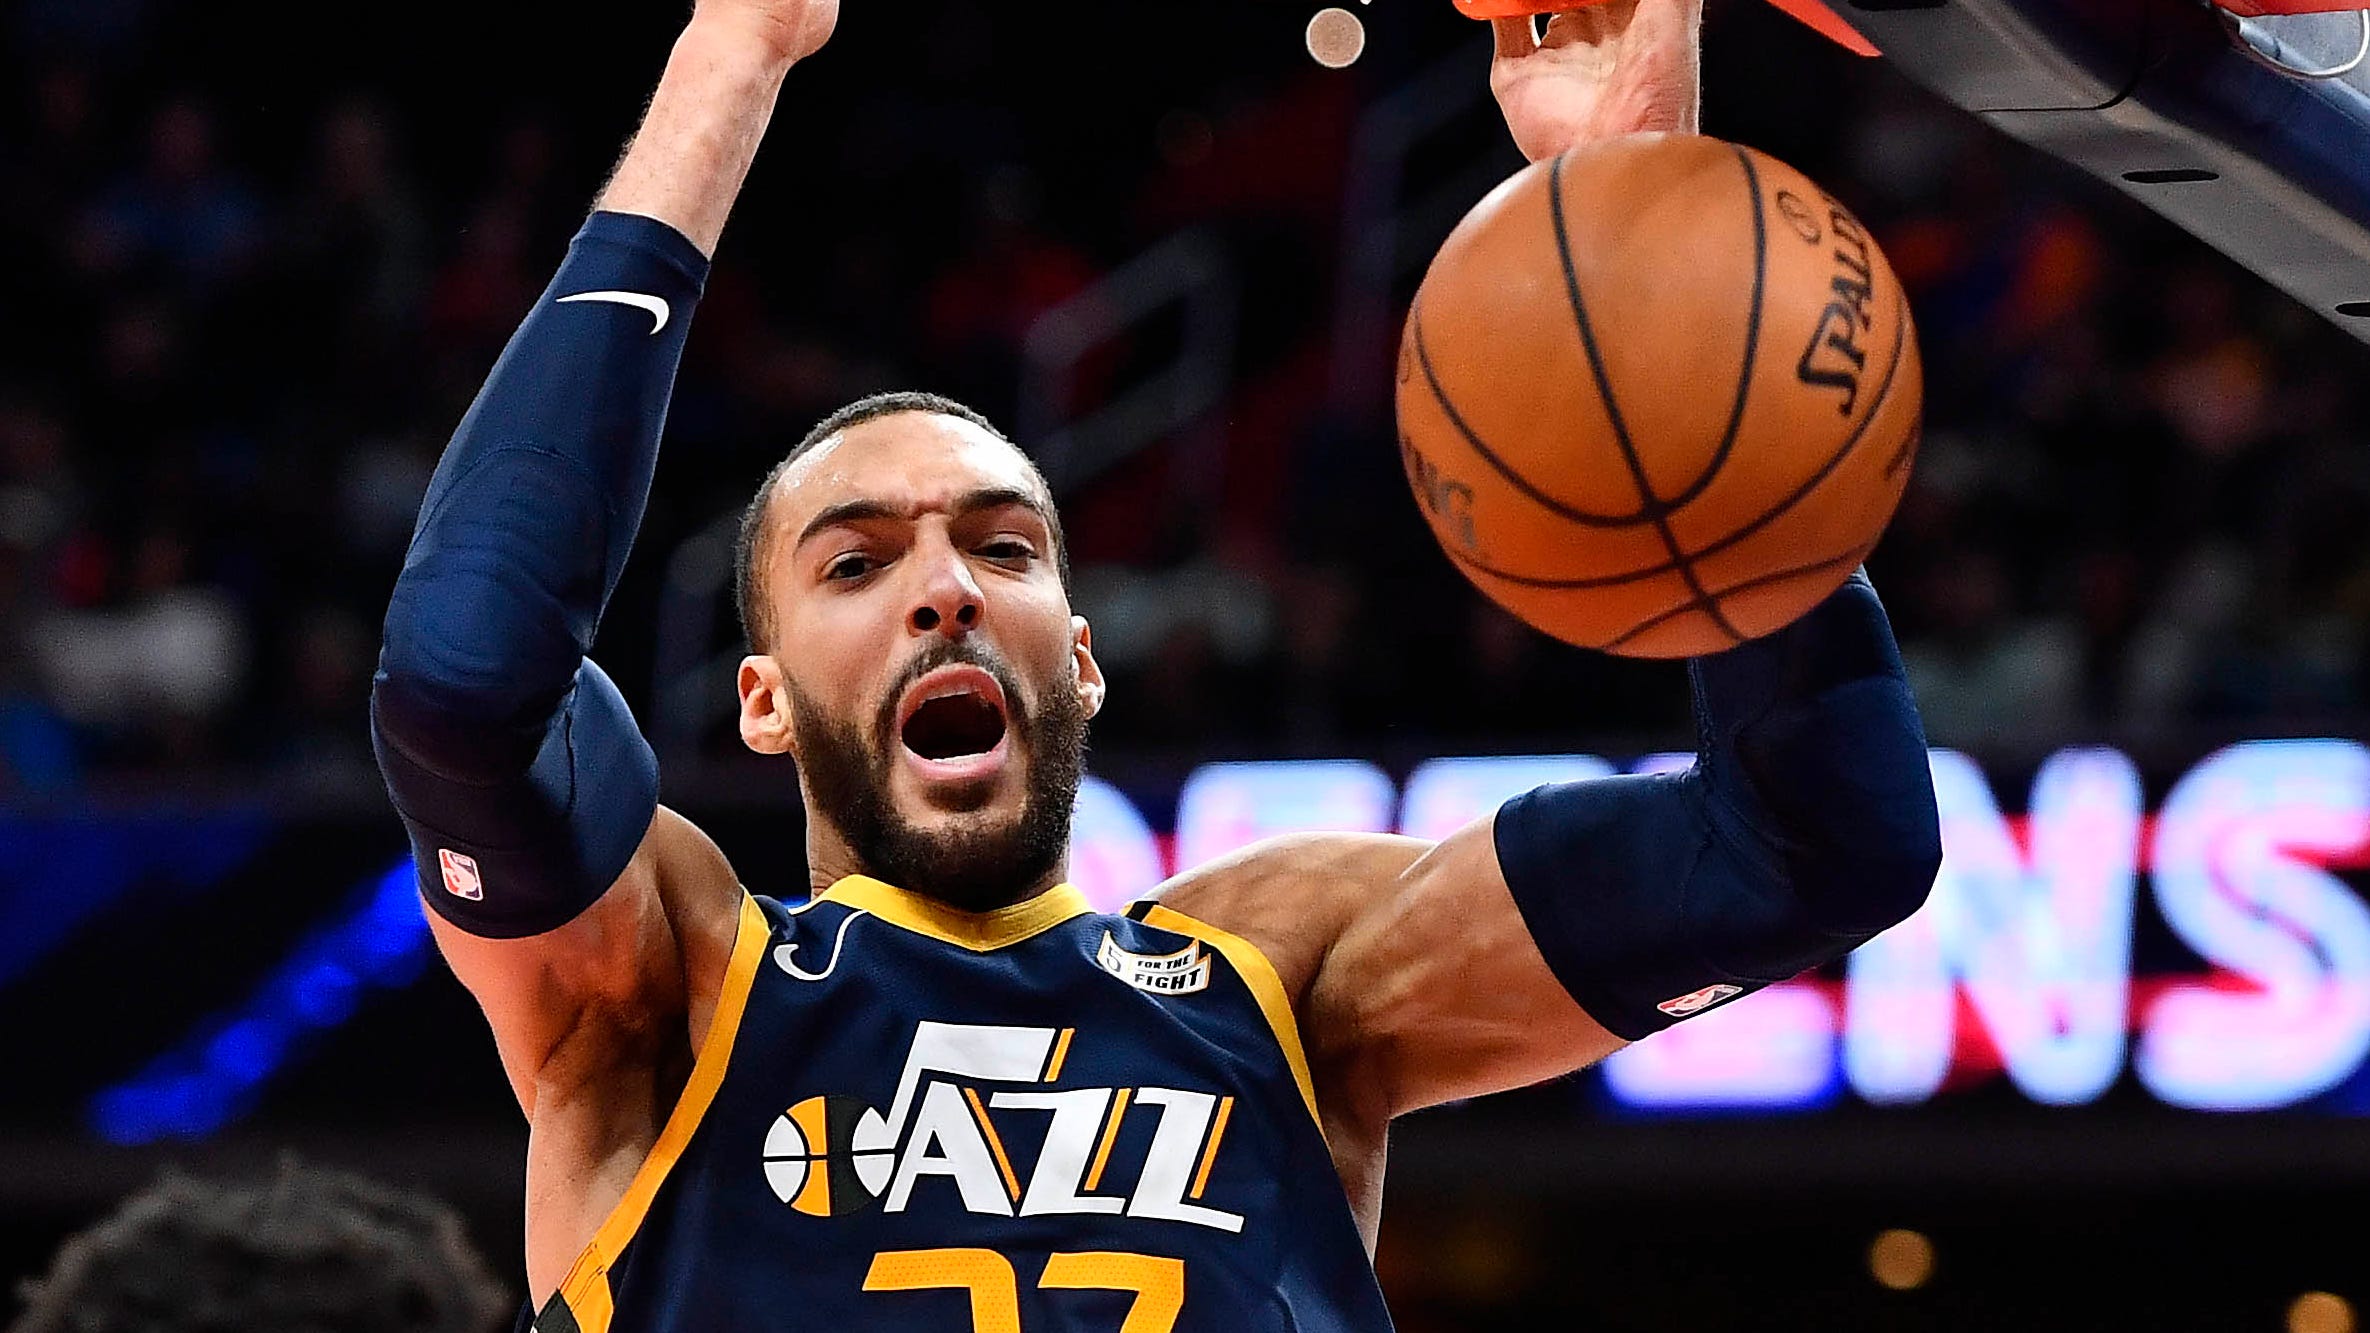 Rudy Gobert gave gameworn arm sleeves to fans after Detroit Pistons game